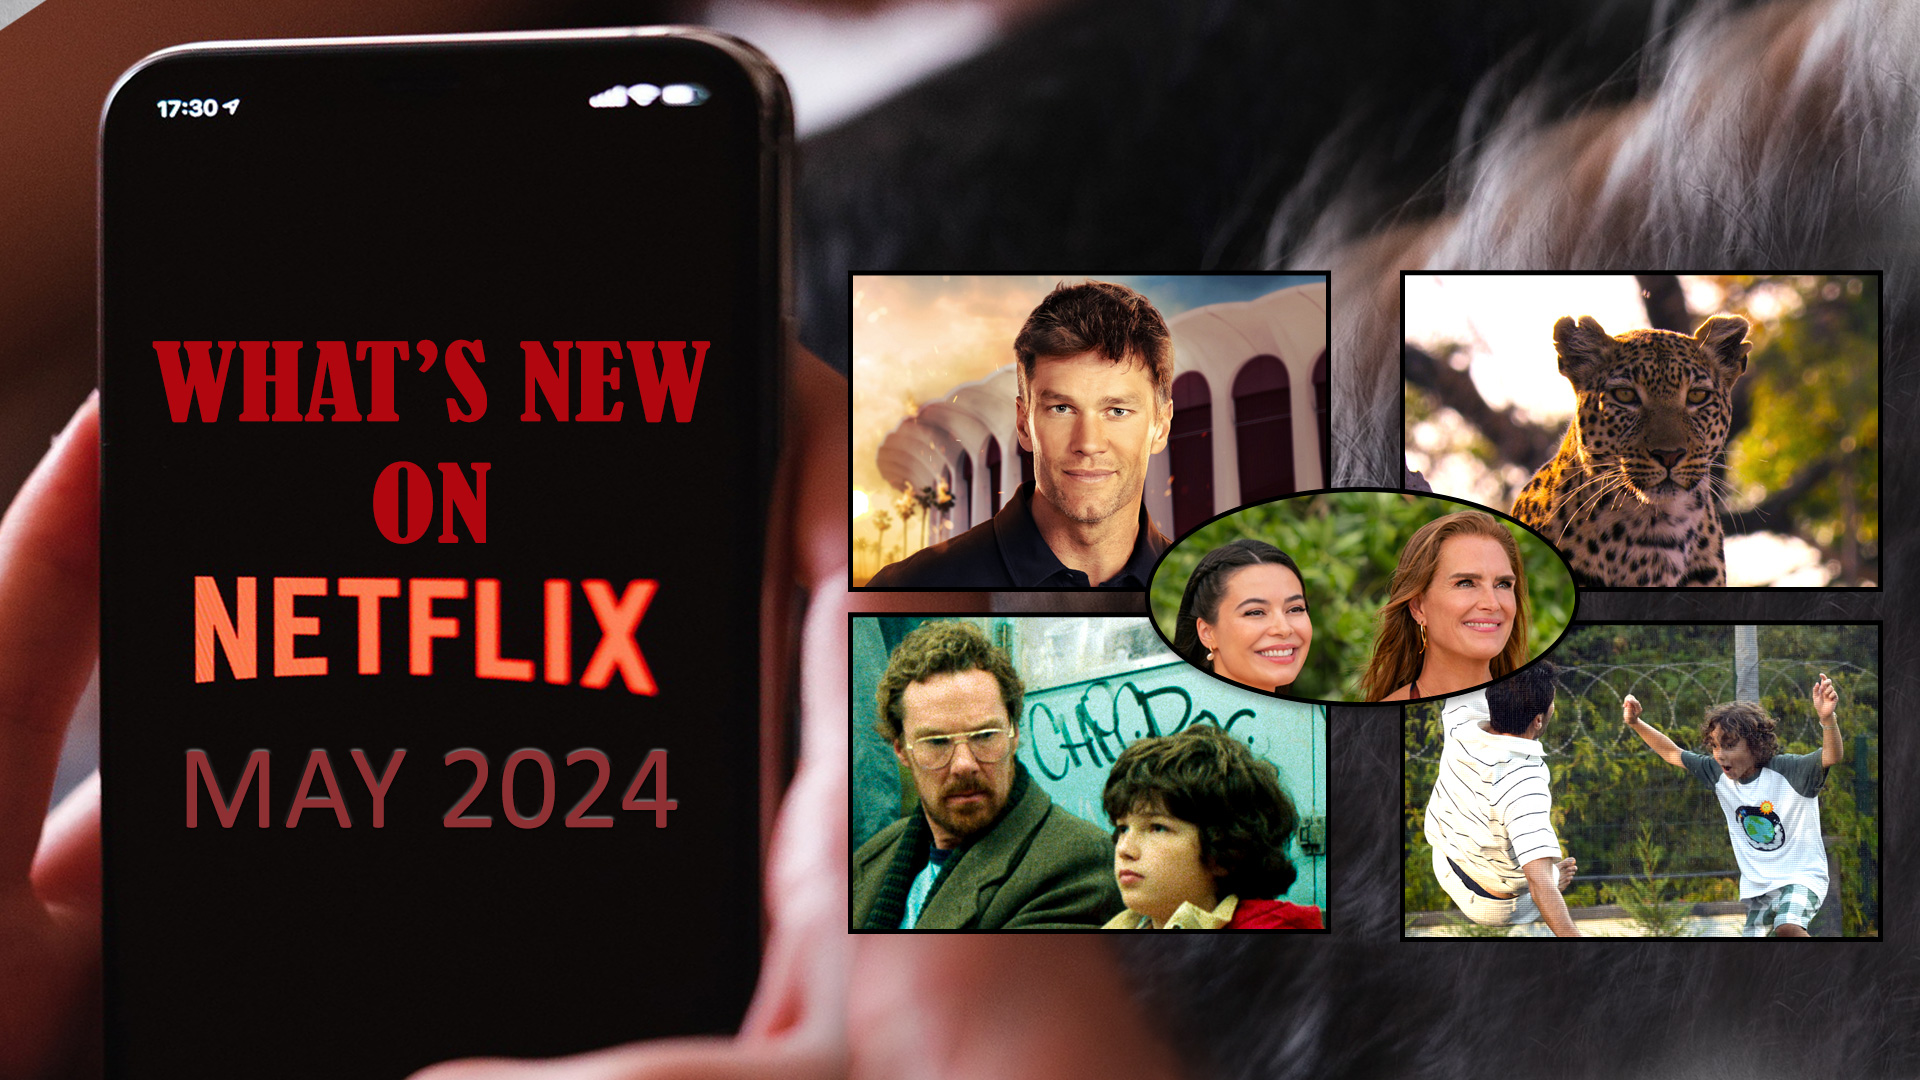 What's New on Netflix May 2024